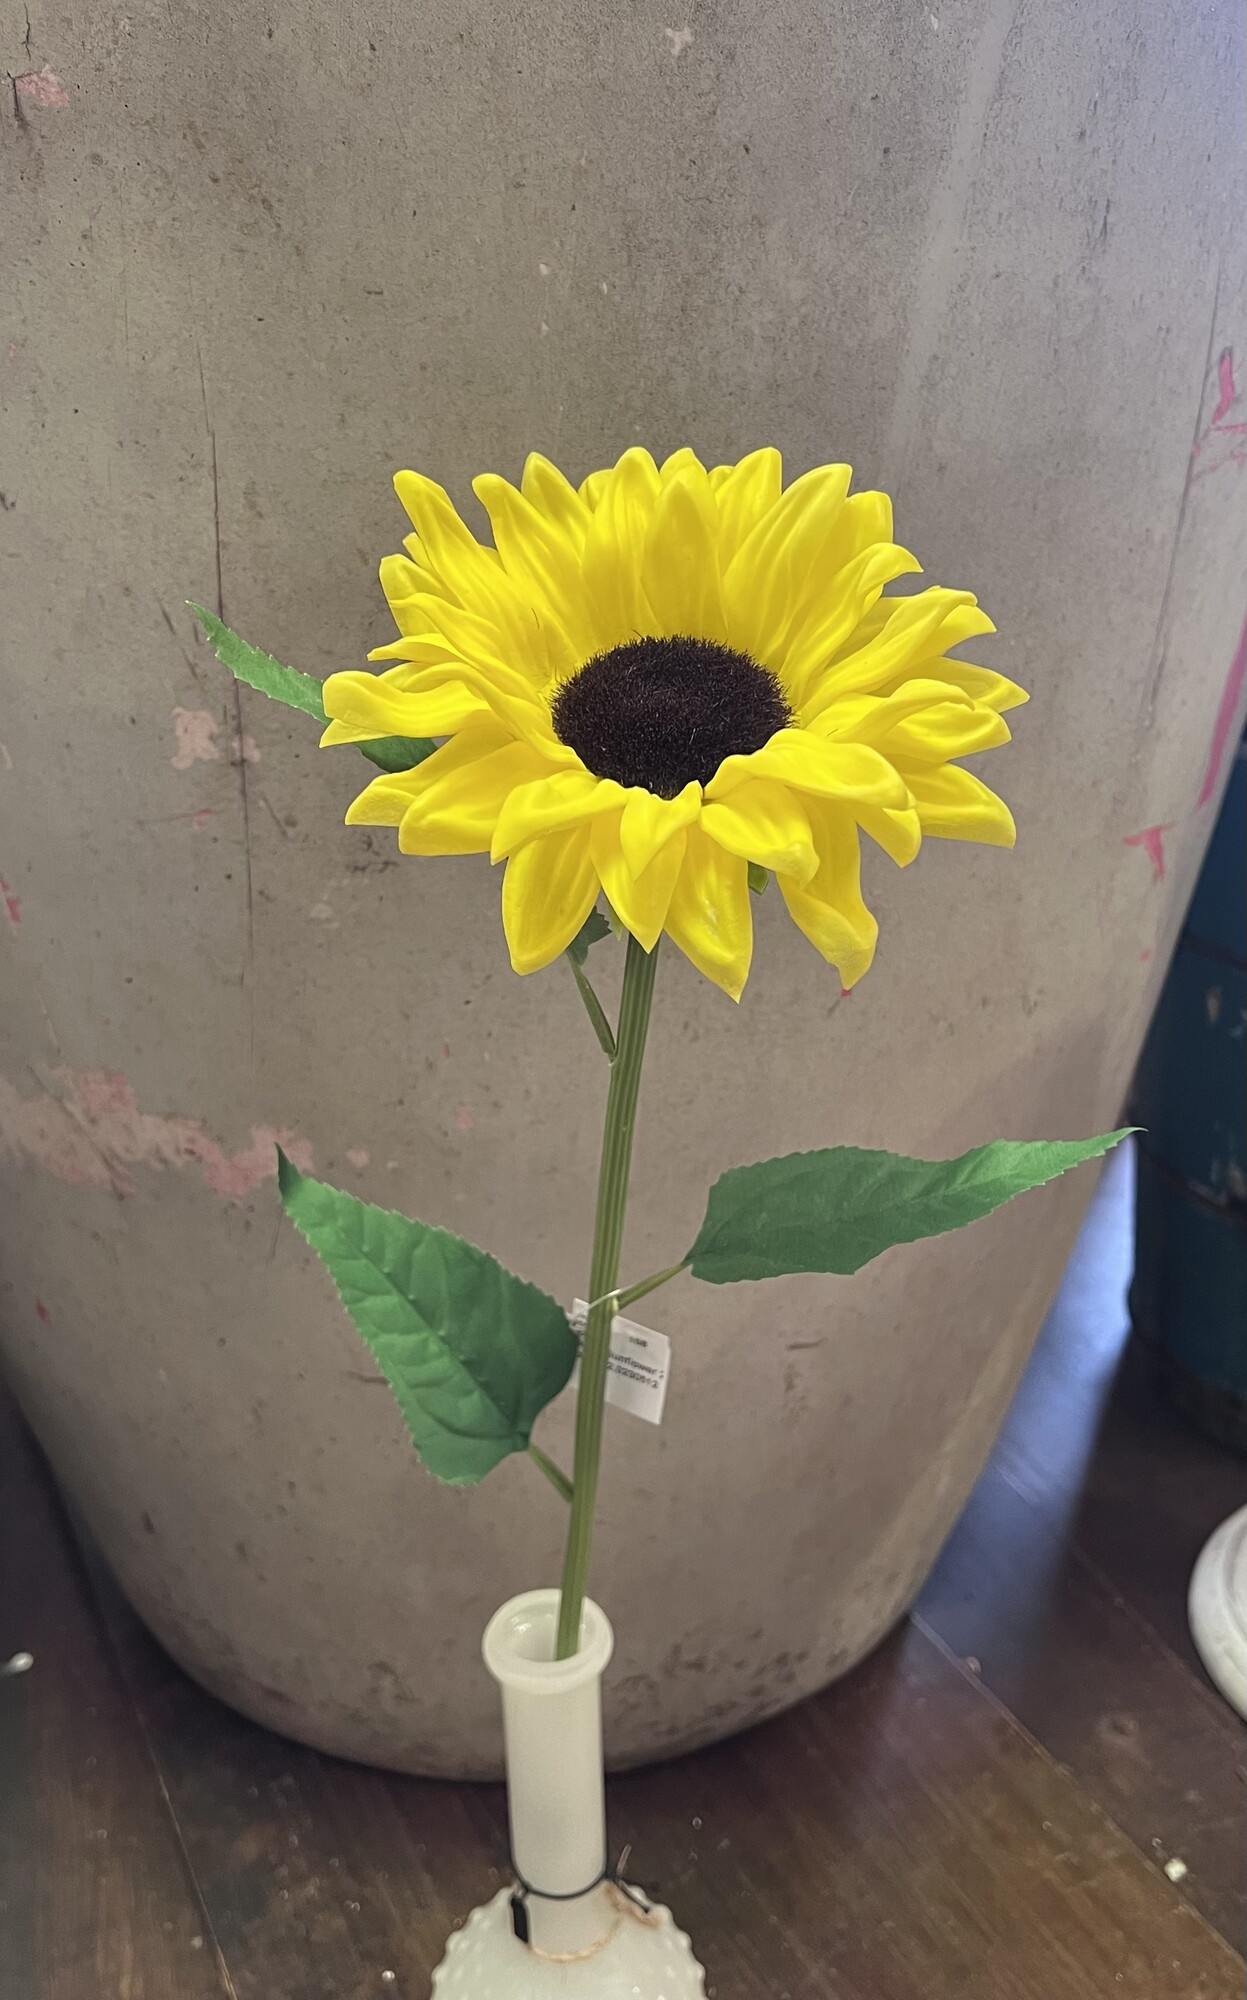 The foamy sunflower stem has foam petals on a flexible plastic stem. It has pretty yellow hues and looks great on its own or paired with similar florals. This stem can brighten any room and measures 20 inches high with a 5.5 inch diameter